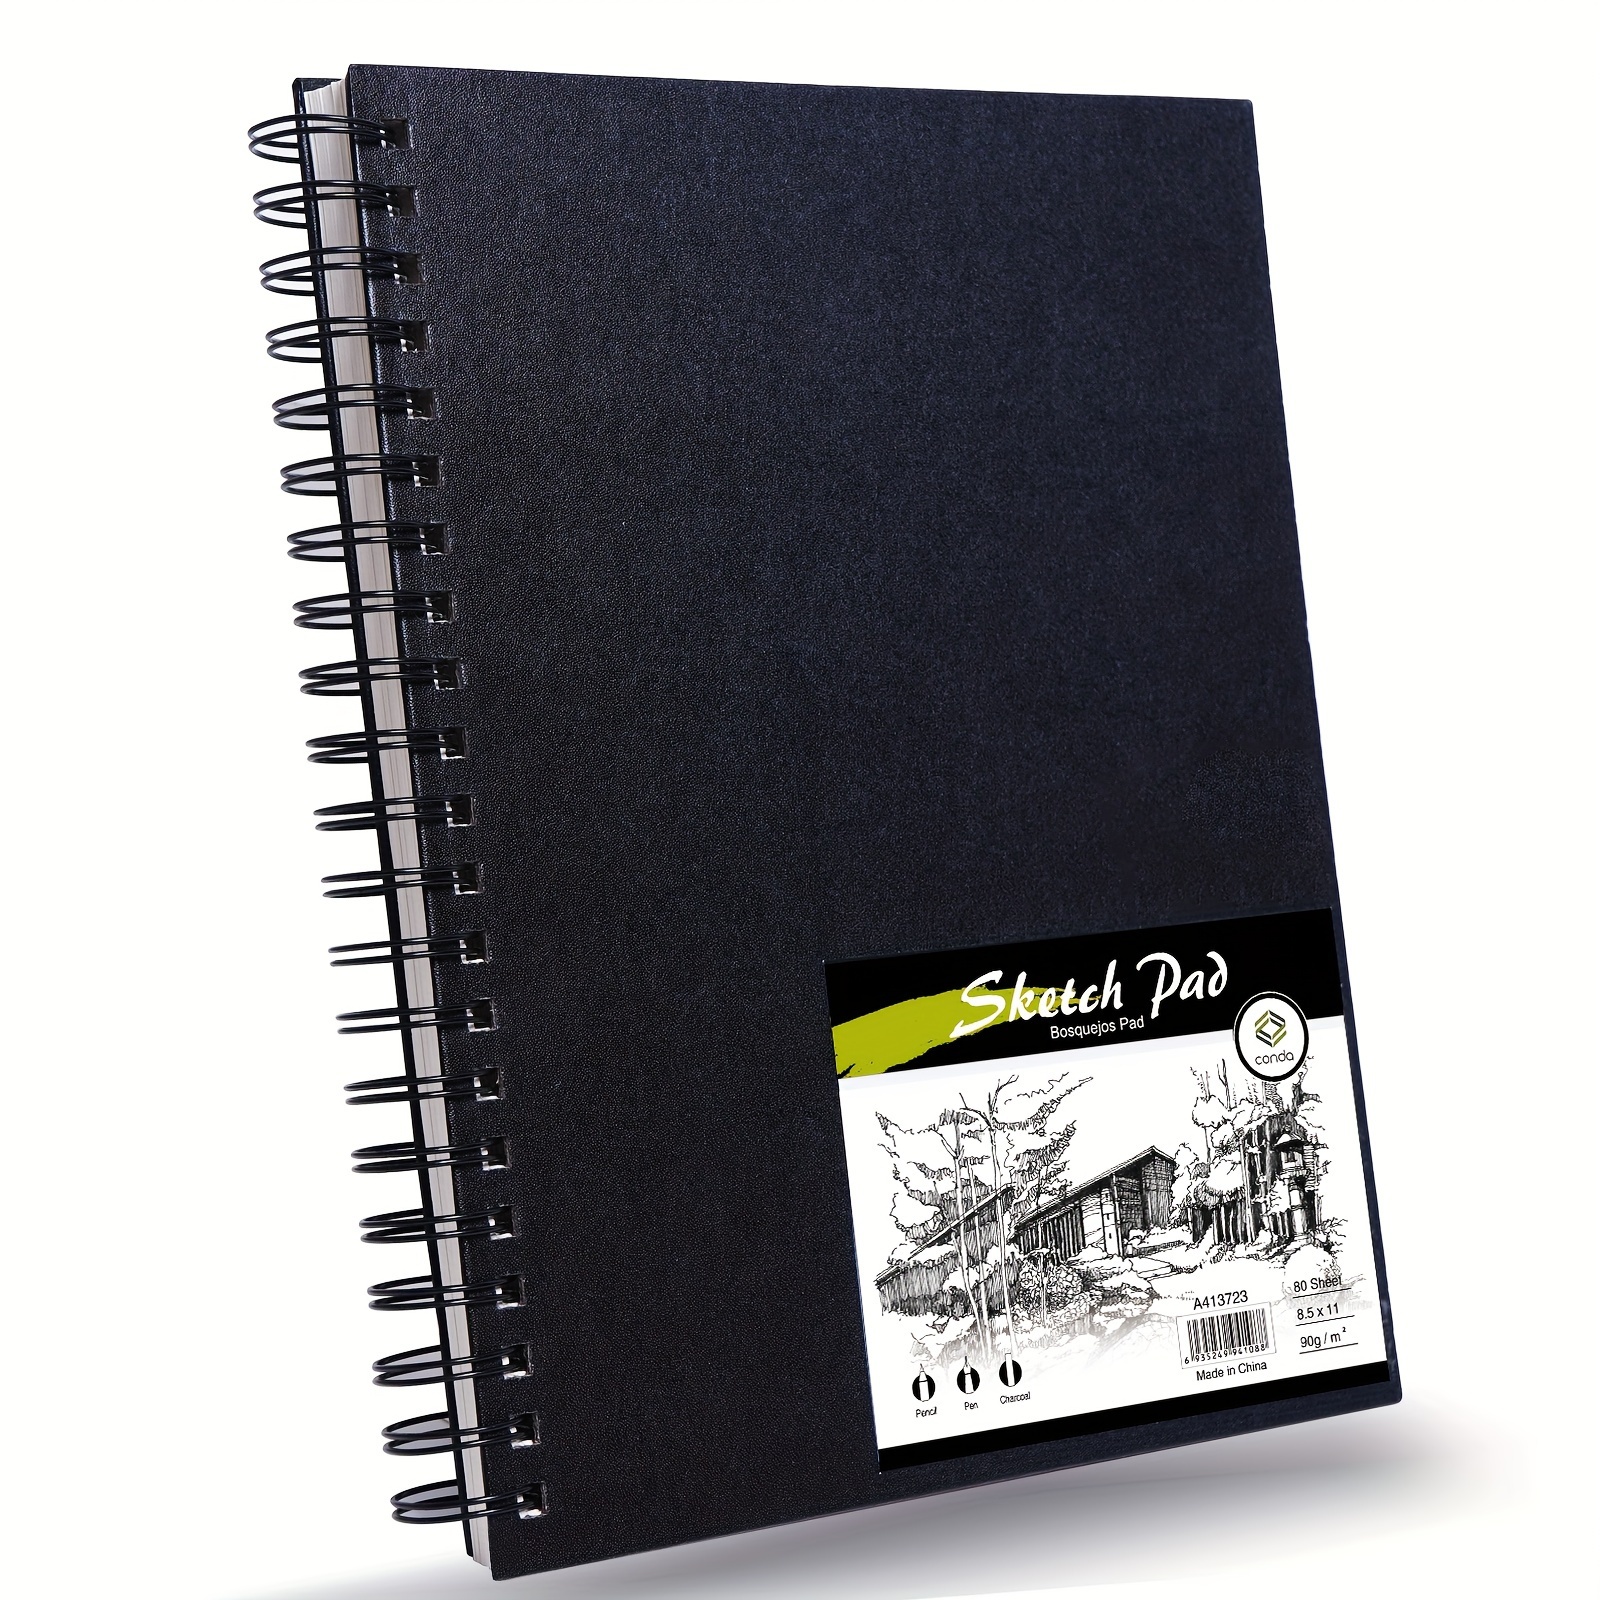  CONDA 9x12 Sketch Book, 100 Sheets (68 lb/100gsm), Spiral  Bound Artist Sketch Pad, Durable Acid Free Drawing Paper for Drawing  Painting, Starry Sky : Arts, Crafts & Sewing